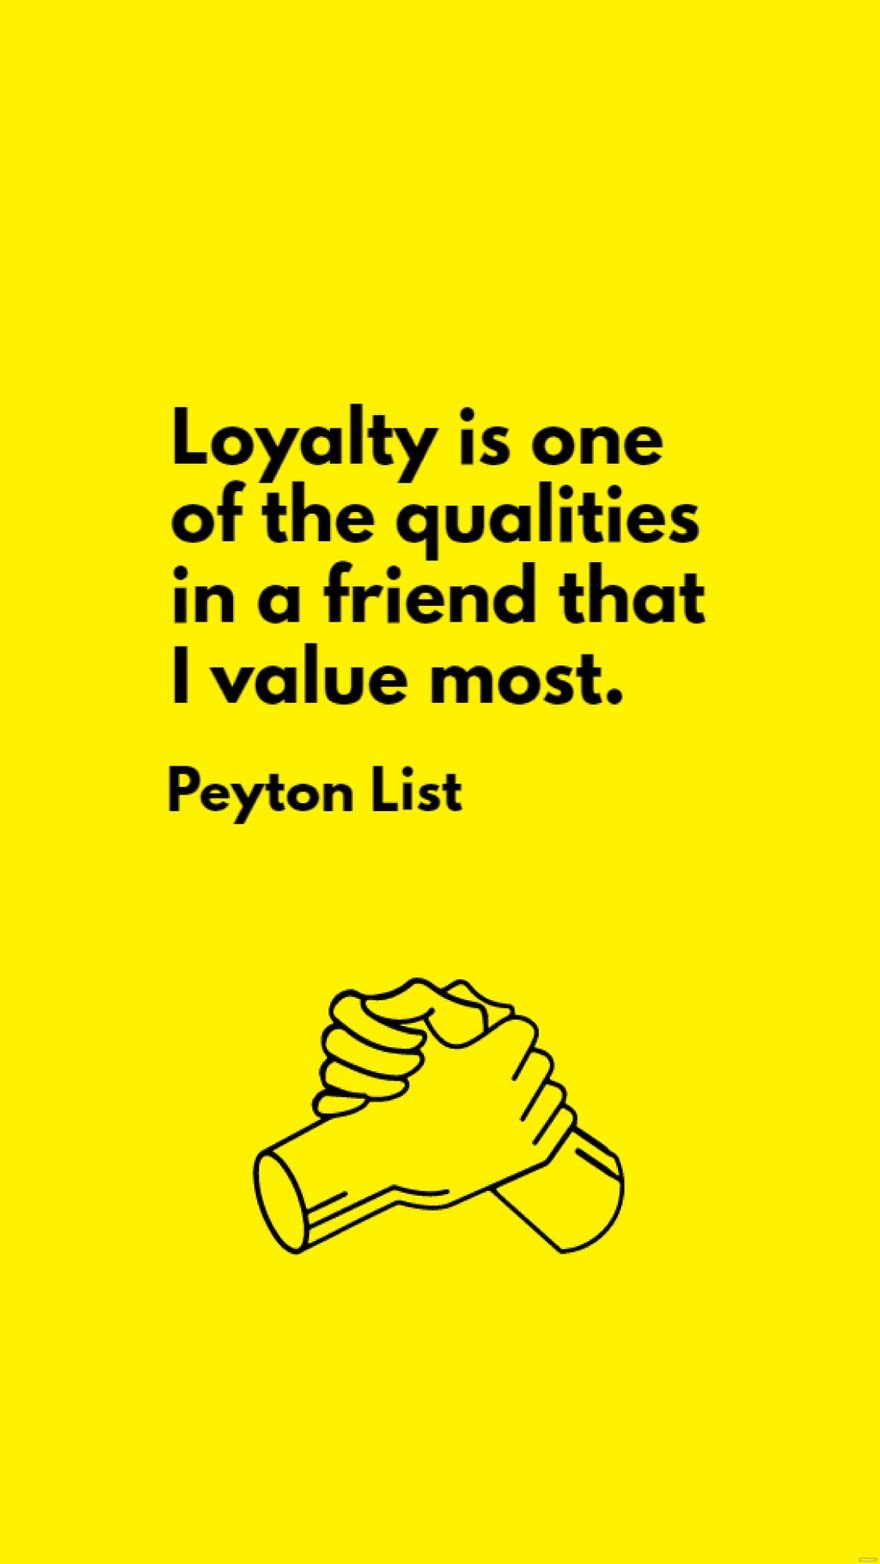 Free Peyton List - Loyalty is one of the qualities in a friend that I value most. in JPG